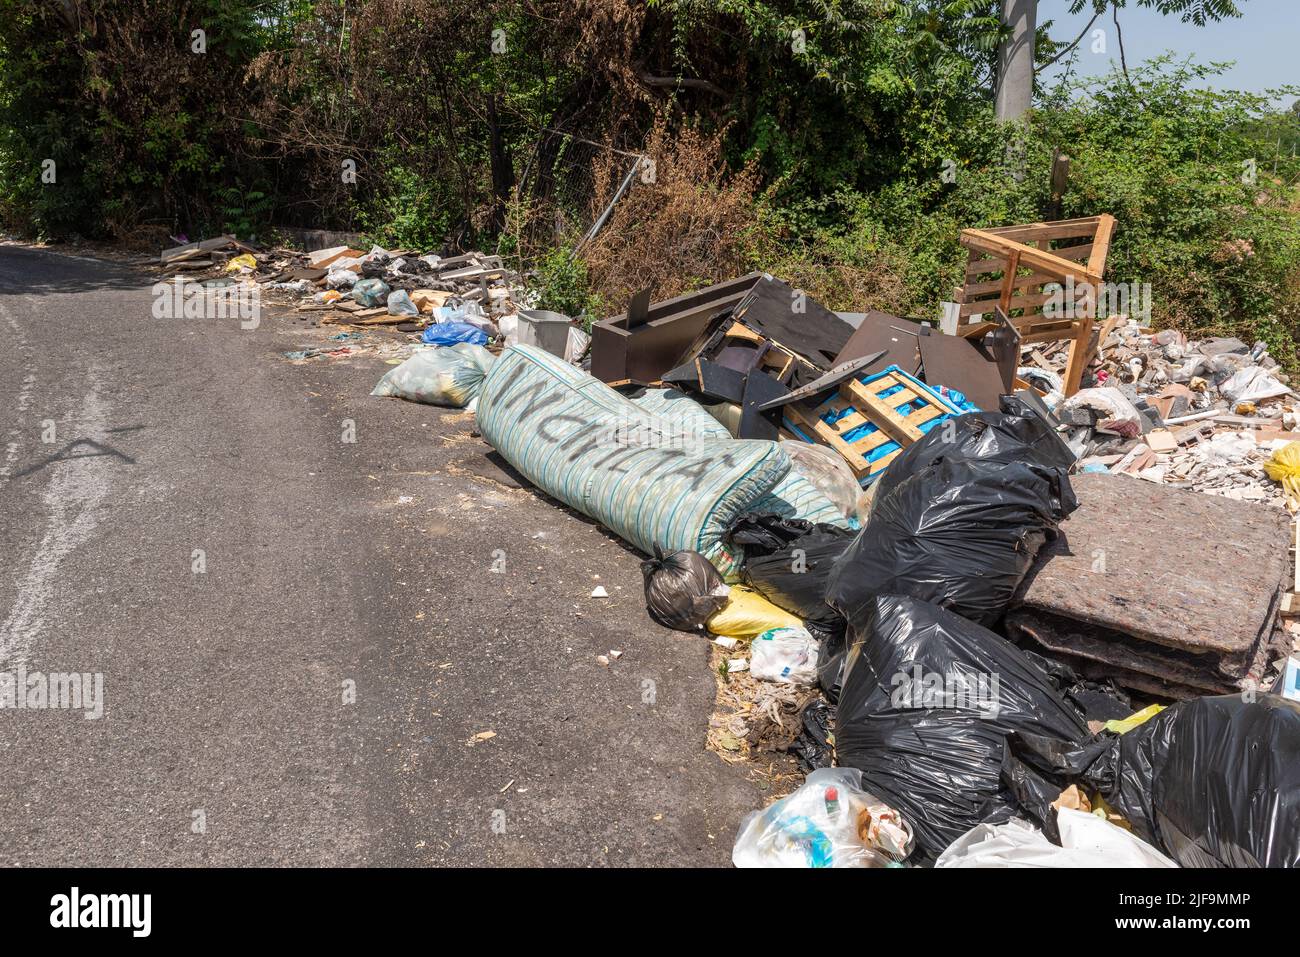 Heaps of domestic refuse dumped by the roadside on Mount Etna, Sicily, Italy. This is a very common sight in rural areas Stock Photo